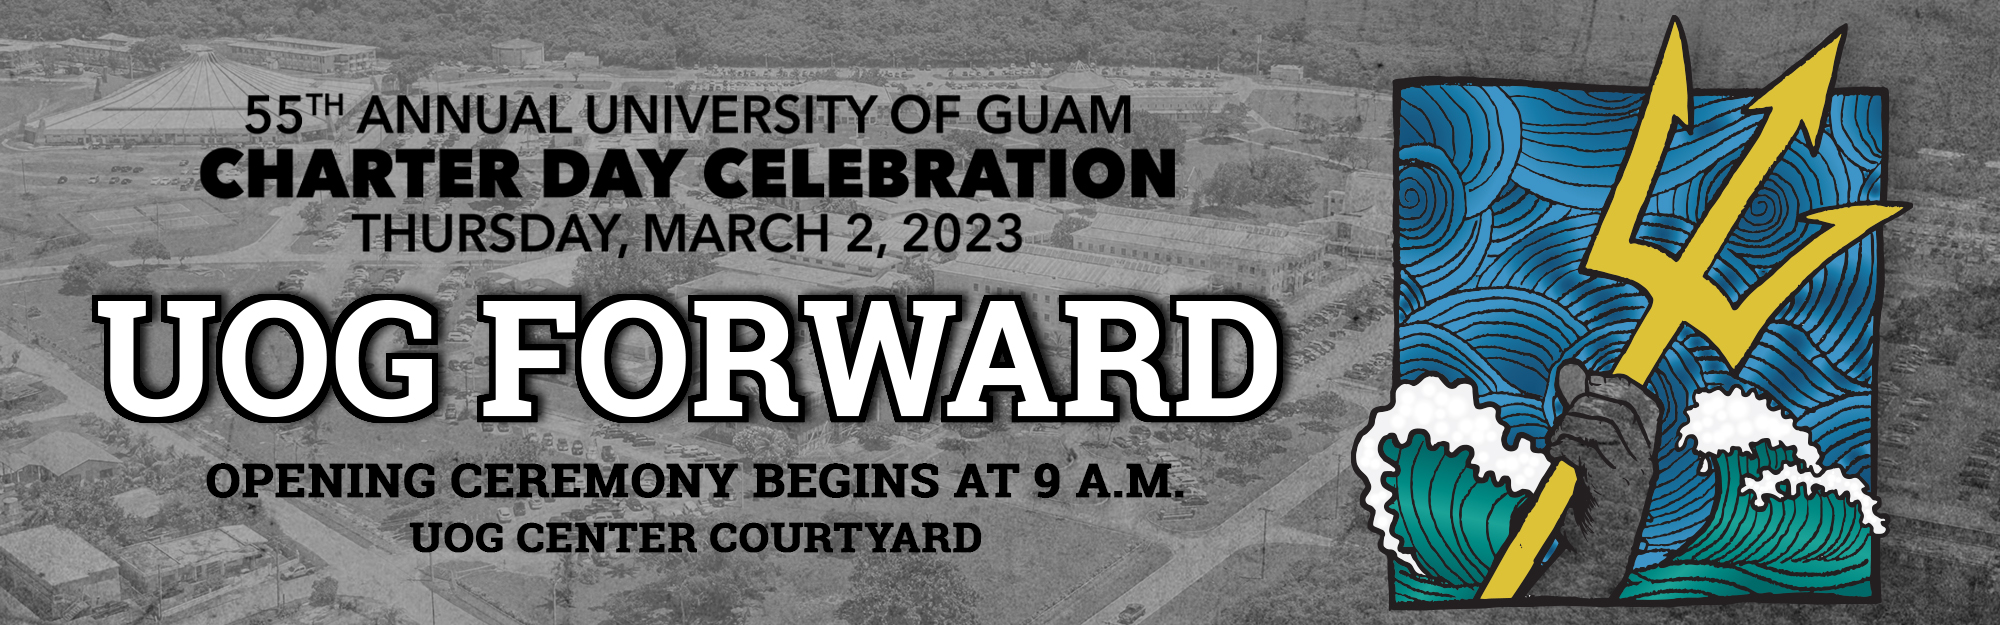 55th Annual University of Guam Charter Day Celebration is on Thursday, March, 2023. This year's theme is UOG Forward. Opening ceremony begins at 9 a.m. at the UOG Center Courtyard.